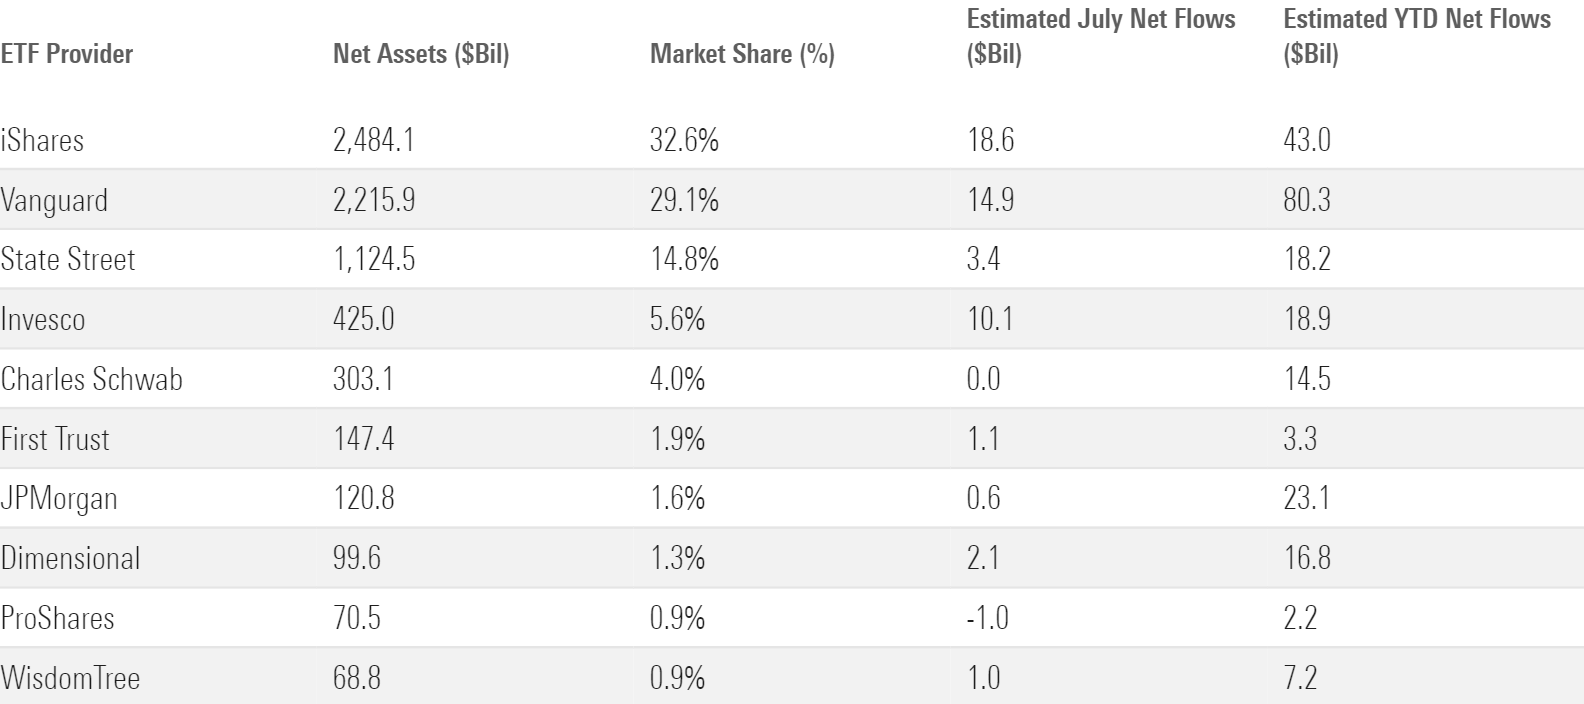 Table showing July flows for the 10 largest ETF providers